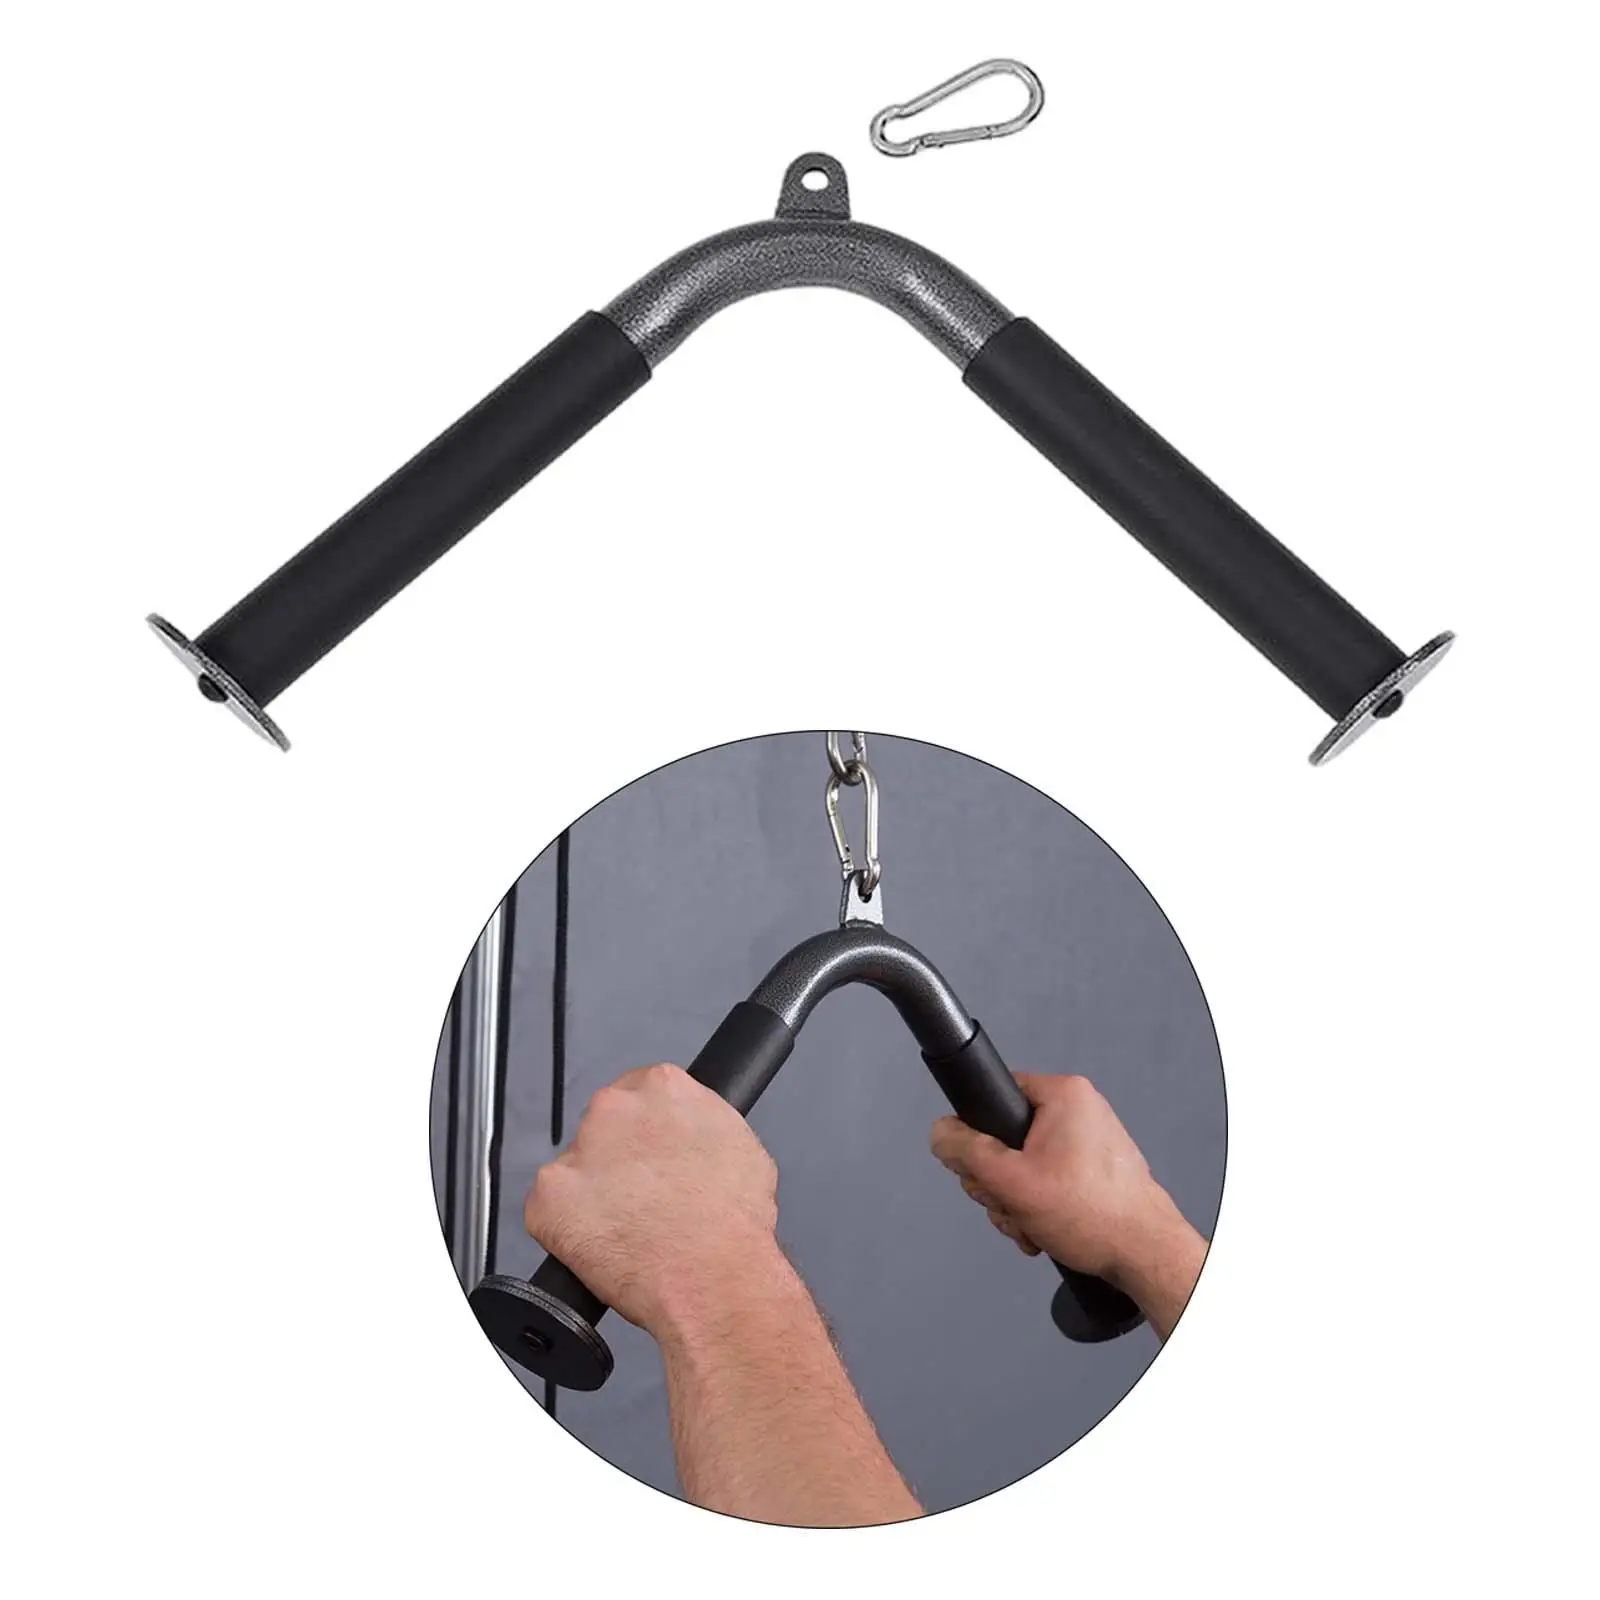 V Shaped Press Down Bar Cable Machine Handle Attachment Strength Training Double Handle for Fitness Exercise Gym Workout